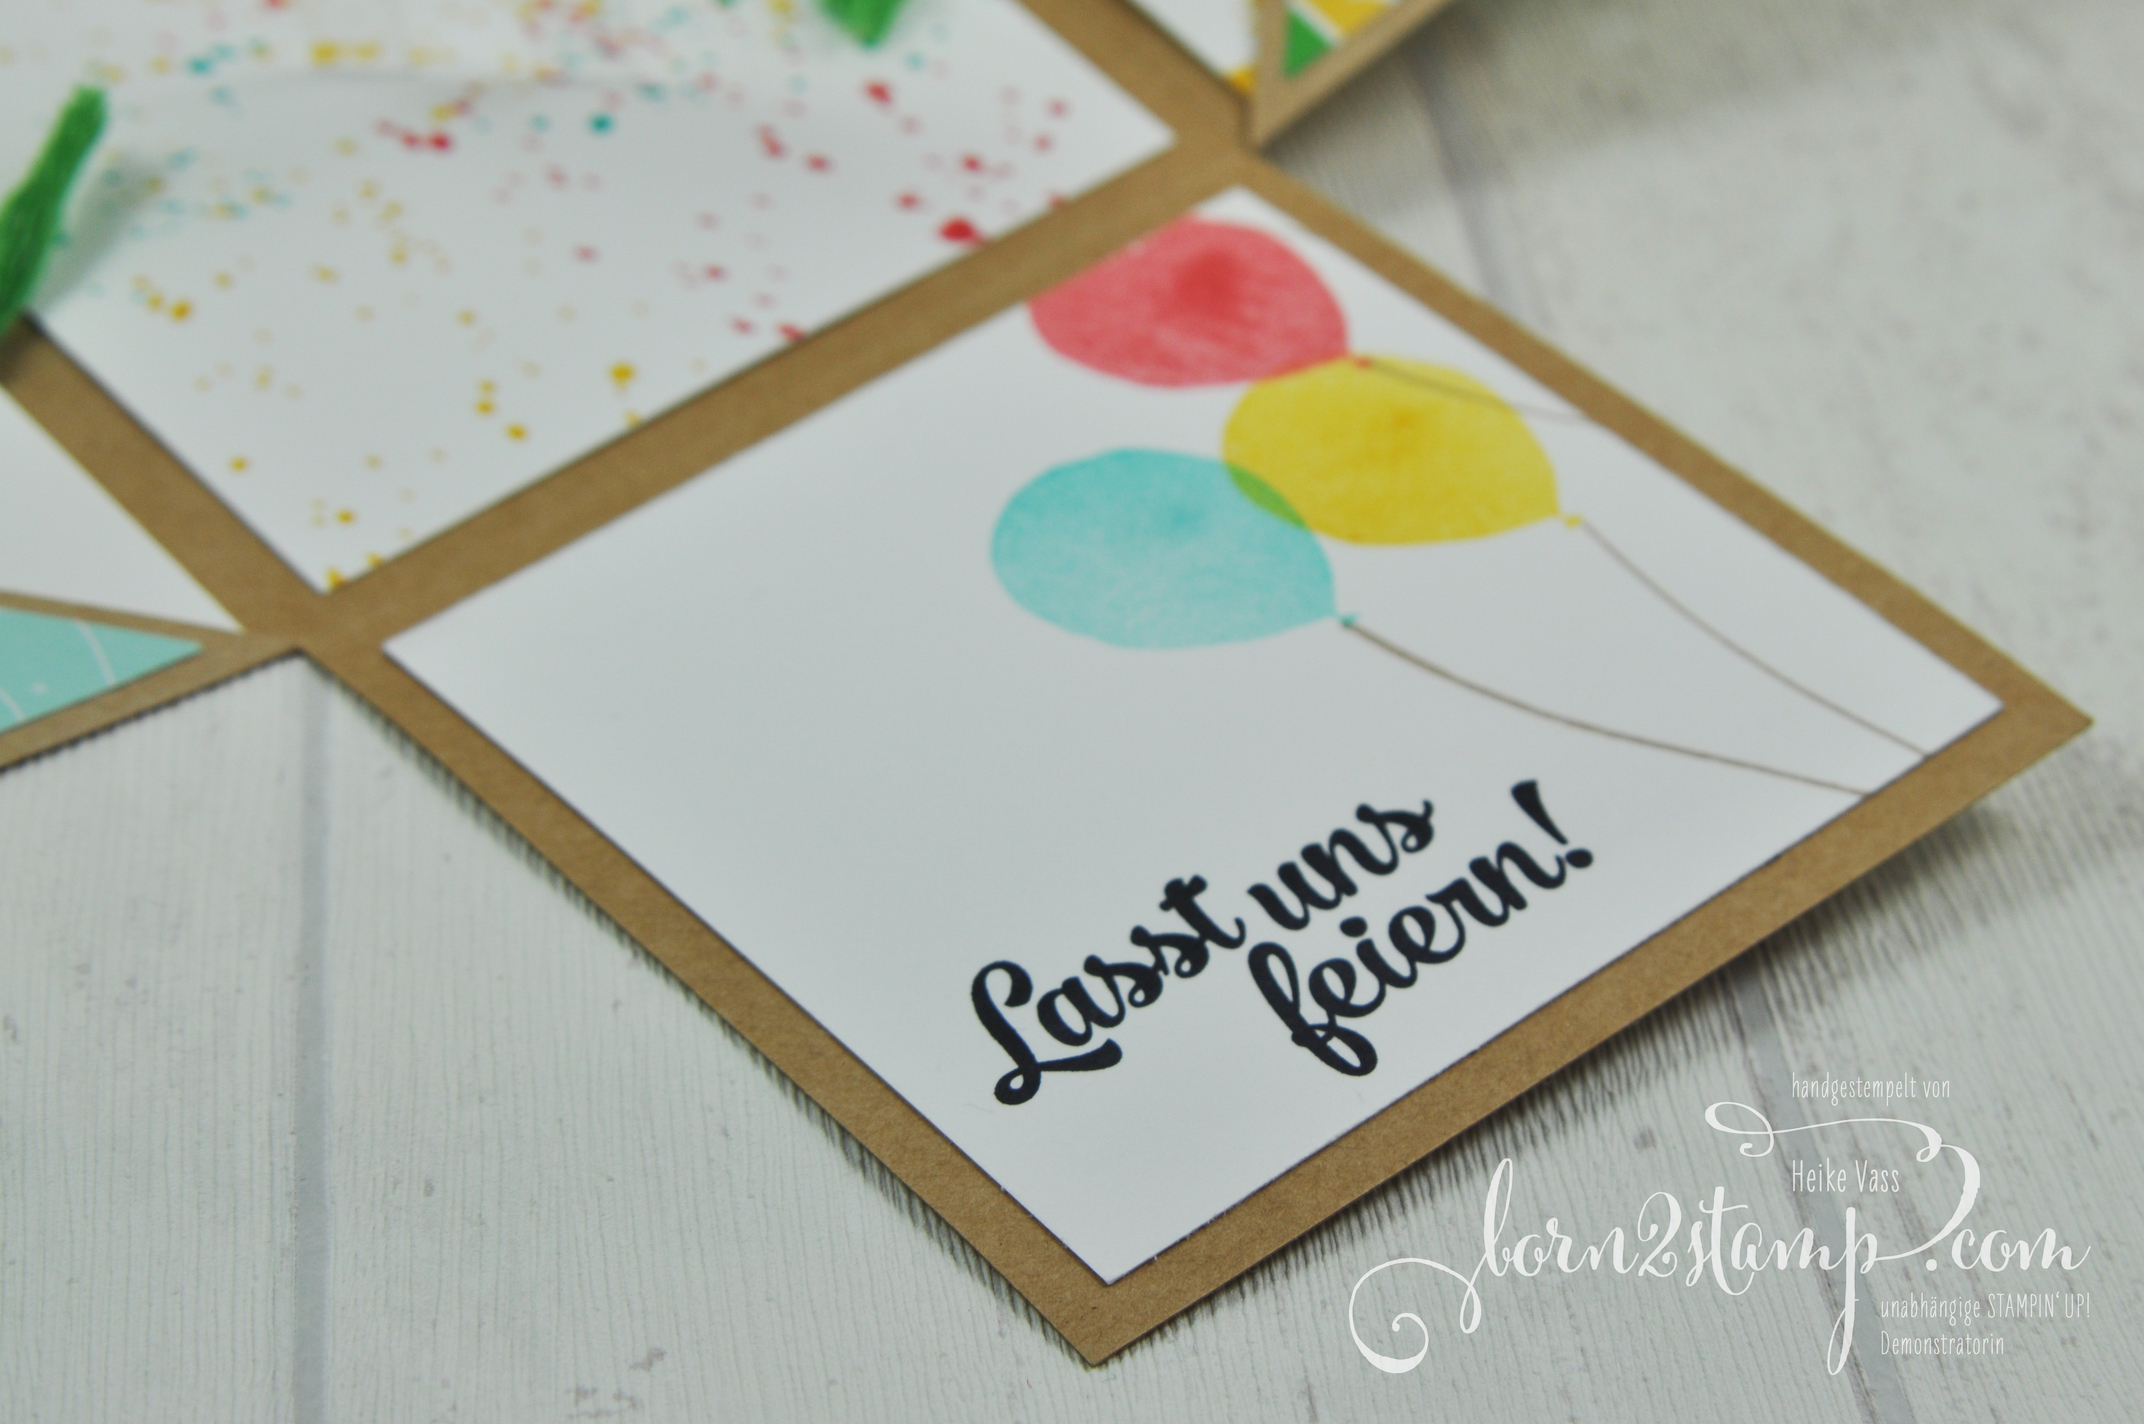 born2stamp STAMPIN‘ UP! Explosionsbox – Geburtstag – DSP Bunte Party – Konfetti-Gruesse – Gorgeous Grunge – Partyballons – So viele Jahre